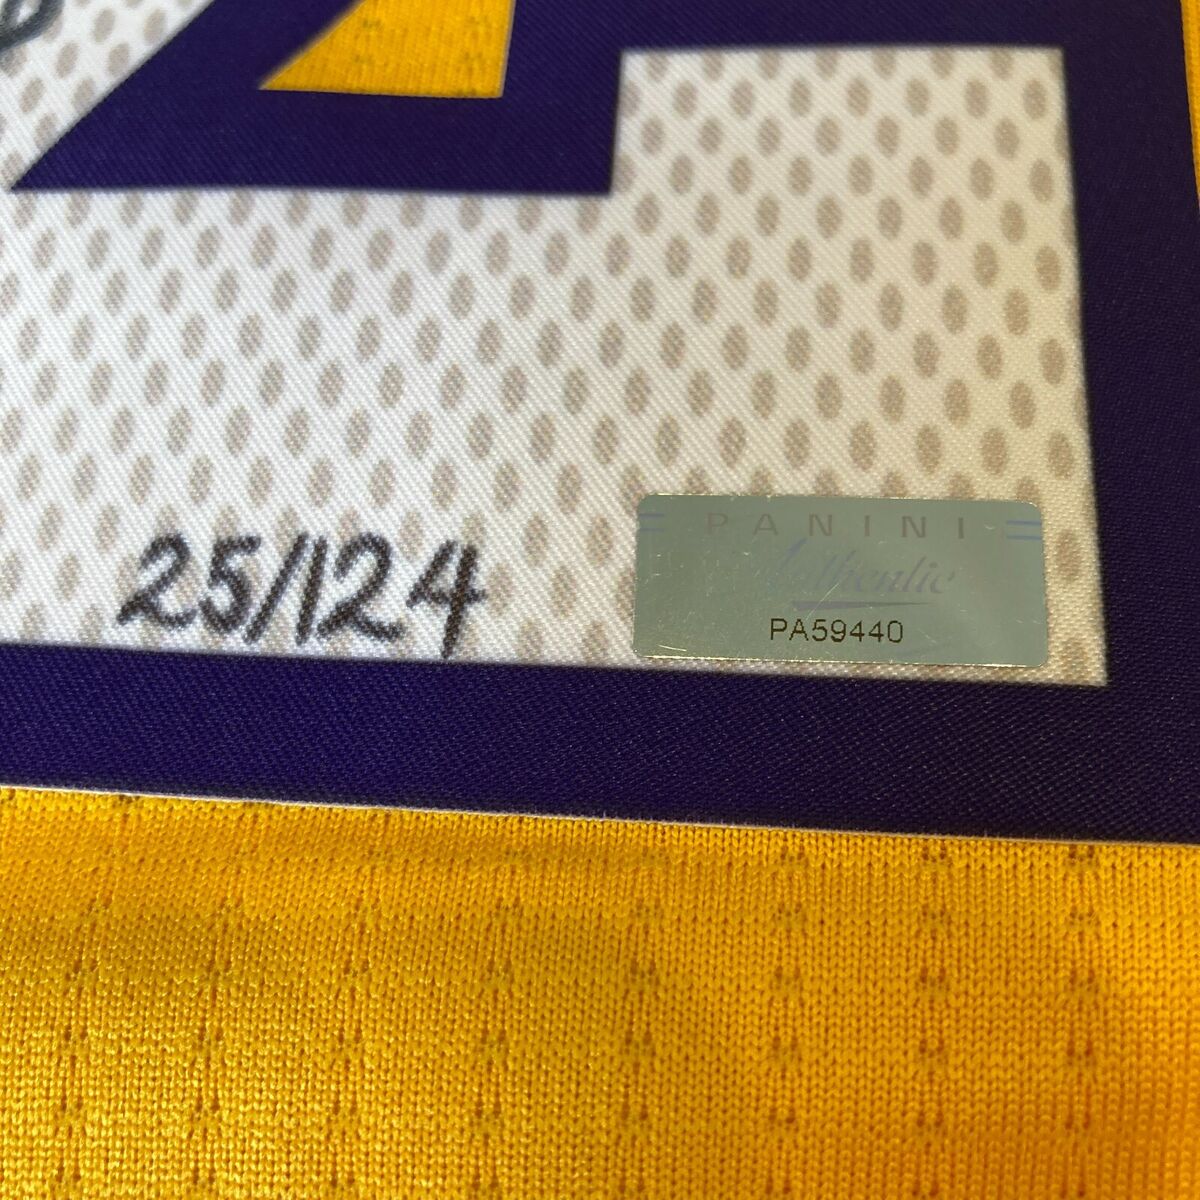 Kobe Bryant Mamba Out Signed #24 Authentic Los Angeles Lakers Jersey  Panini - Autographed NBA Jerseys at 's Sports Collectibles Store